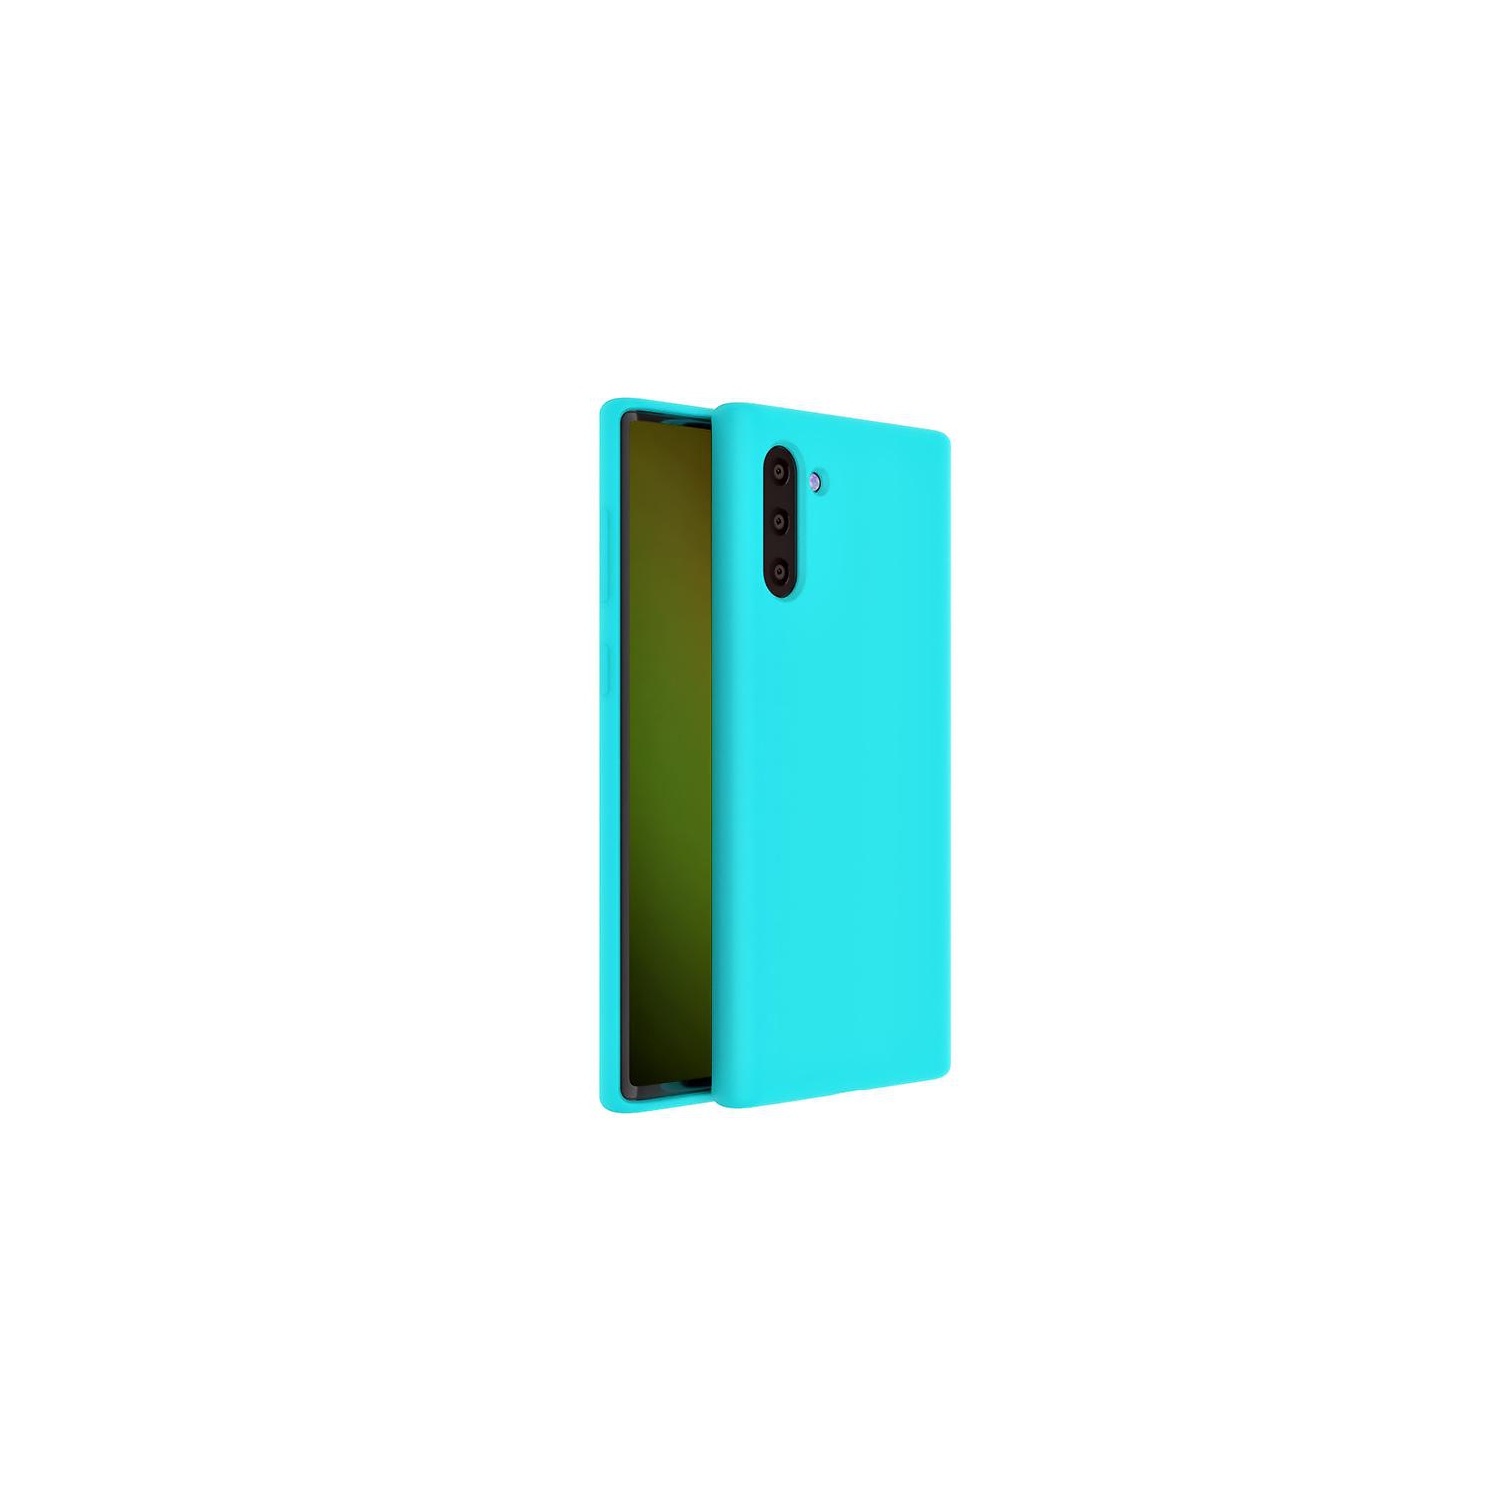 PANDACO Soft Shell Matte Mint Blue Case for Samsung Galaxy Note 10